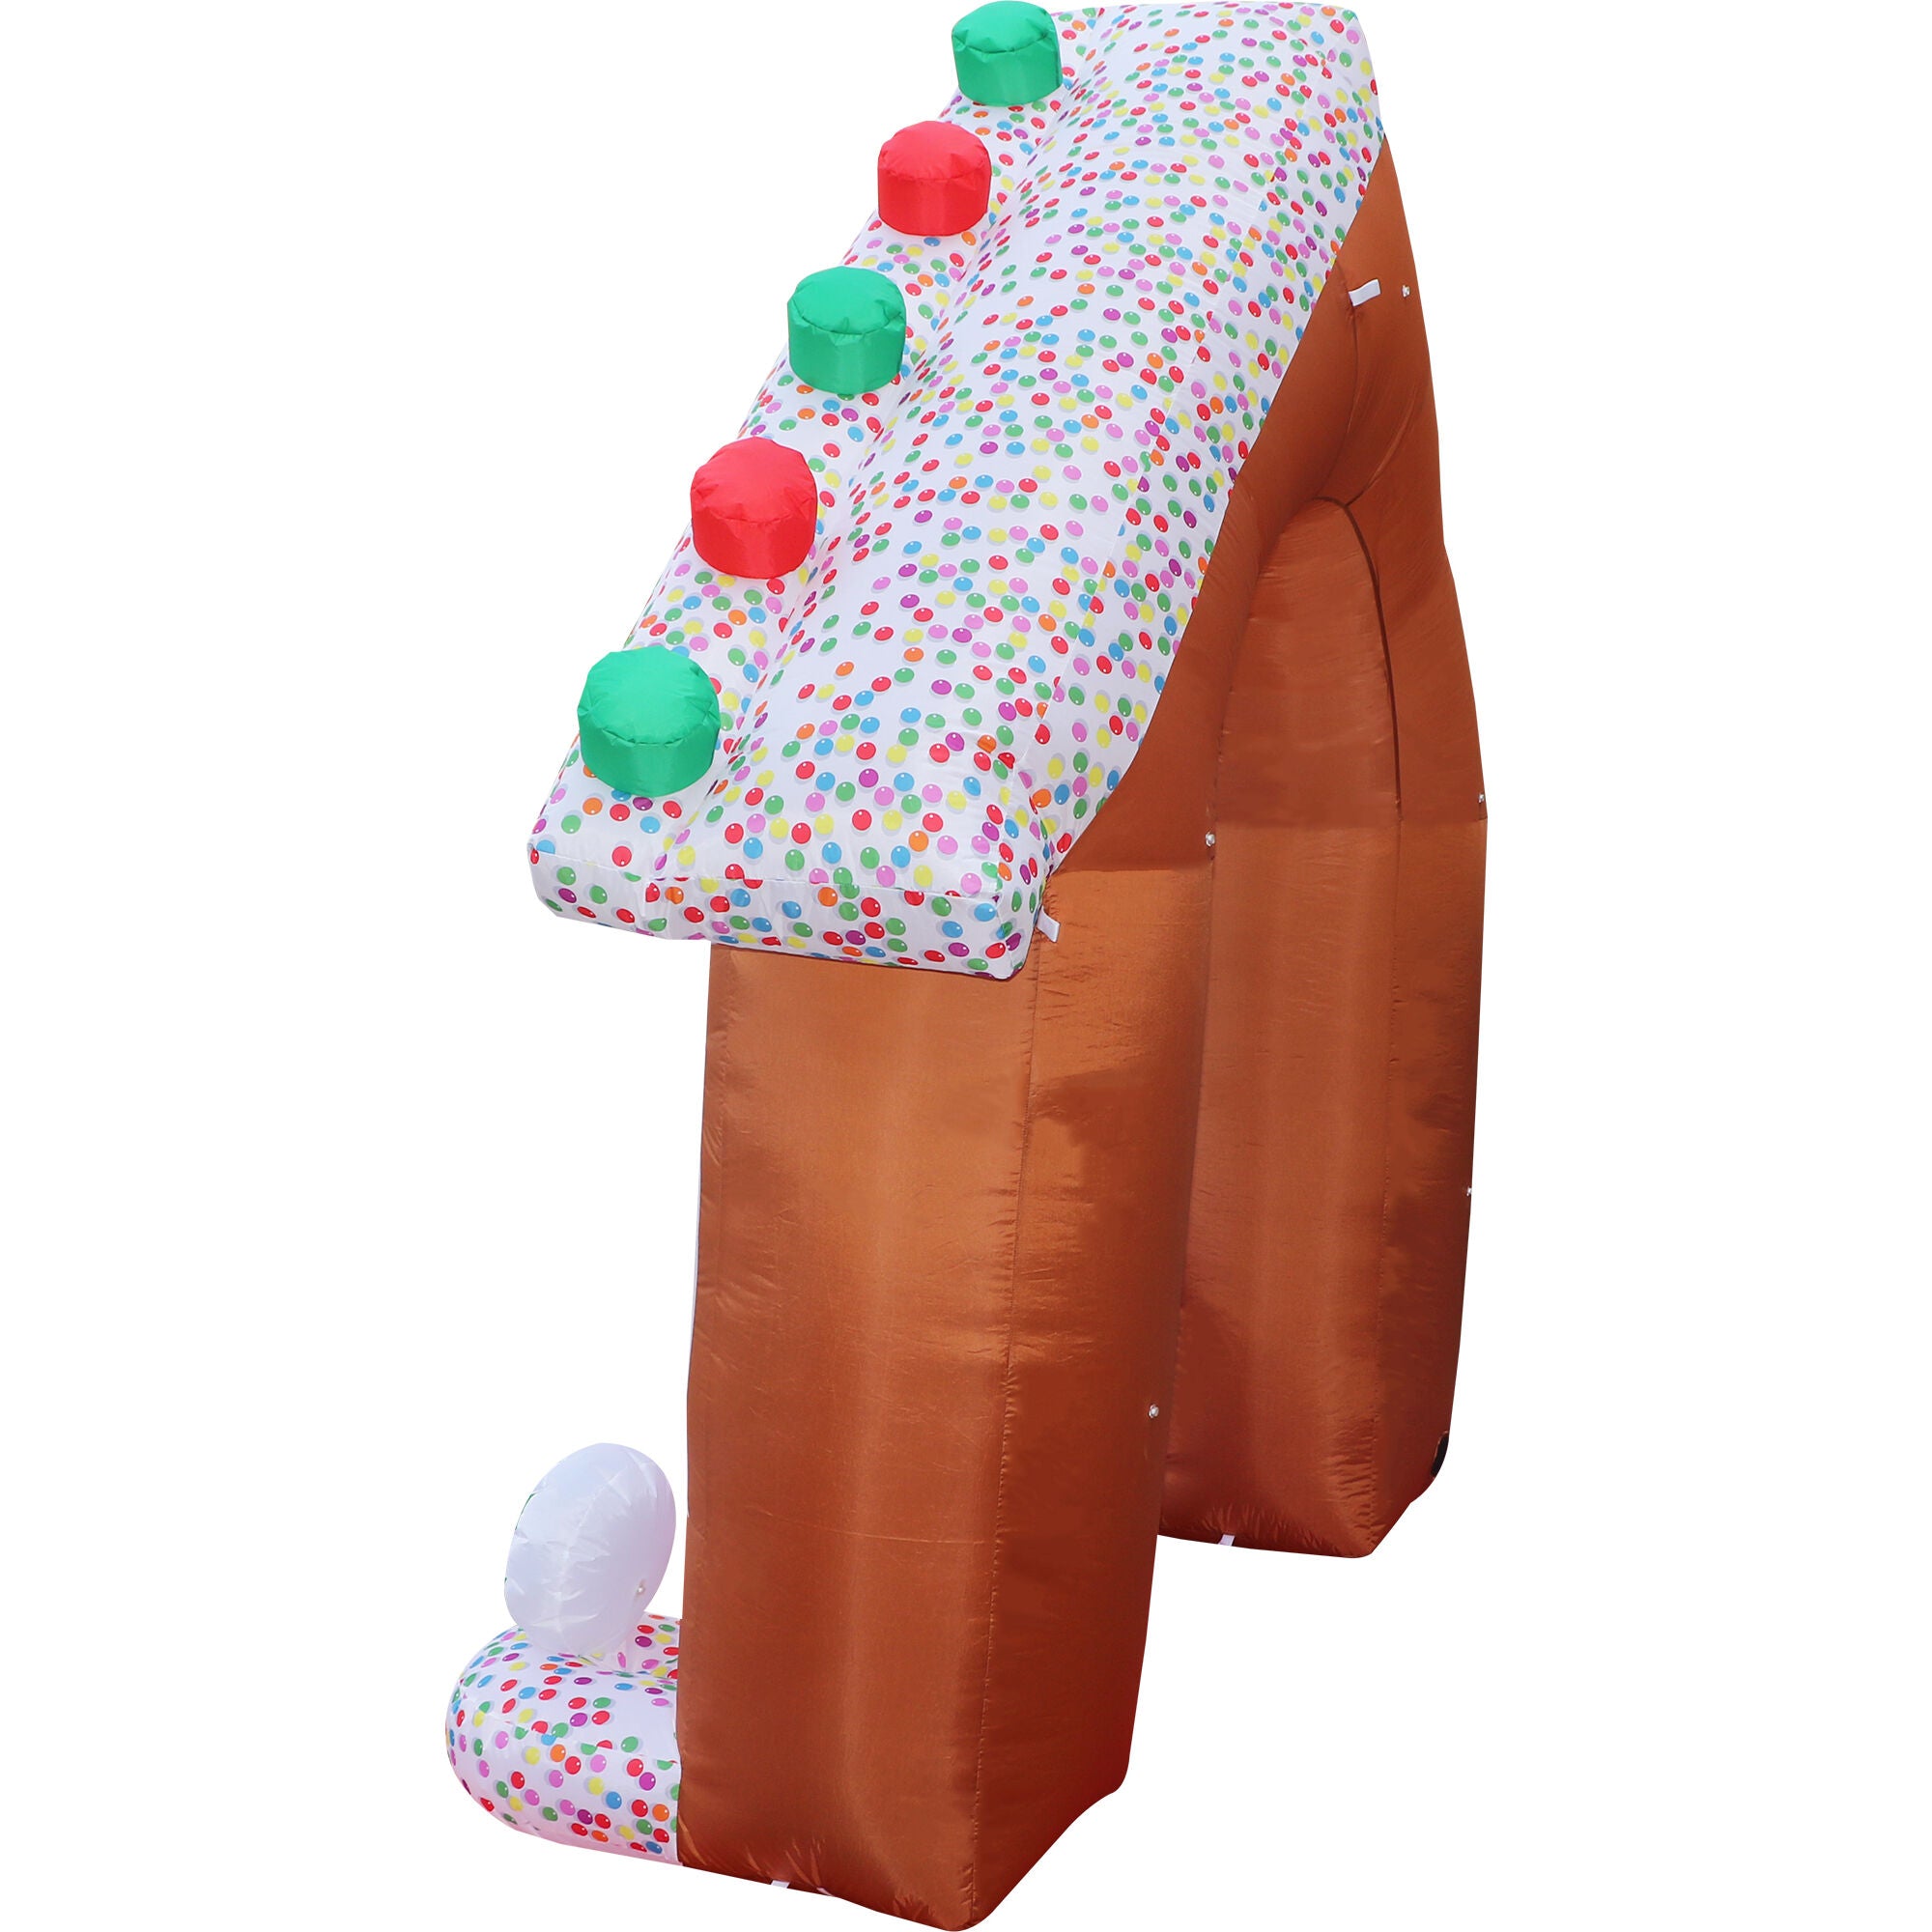 Fraser Hill Farm - 8-Ft. Tall Prelit Gingerbread Arch Inflatable